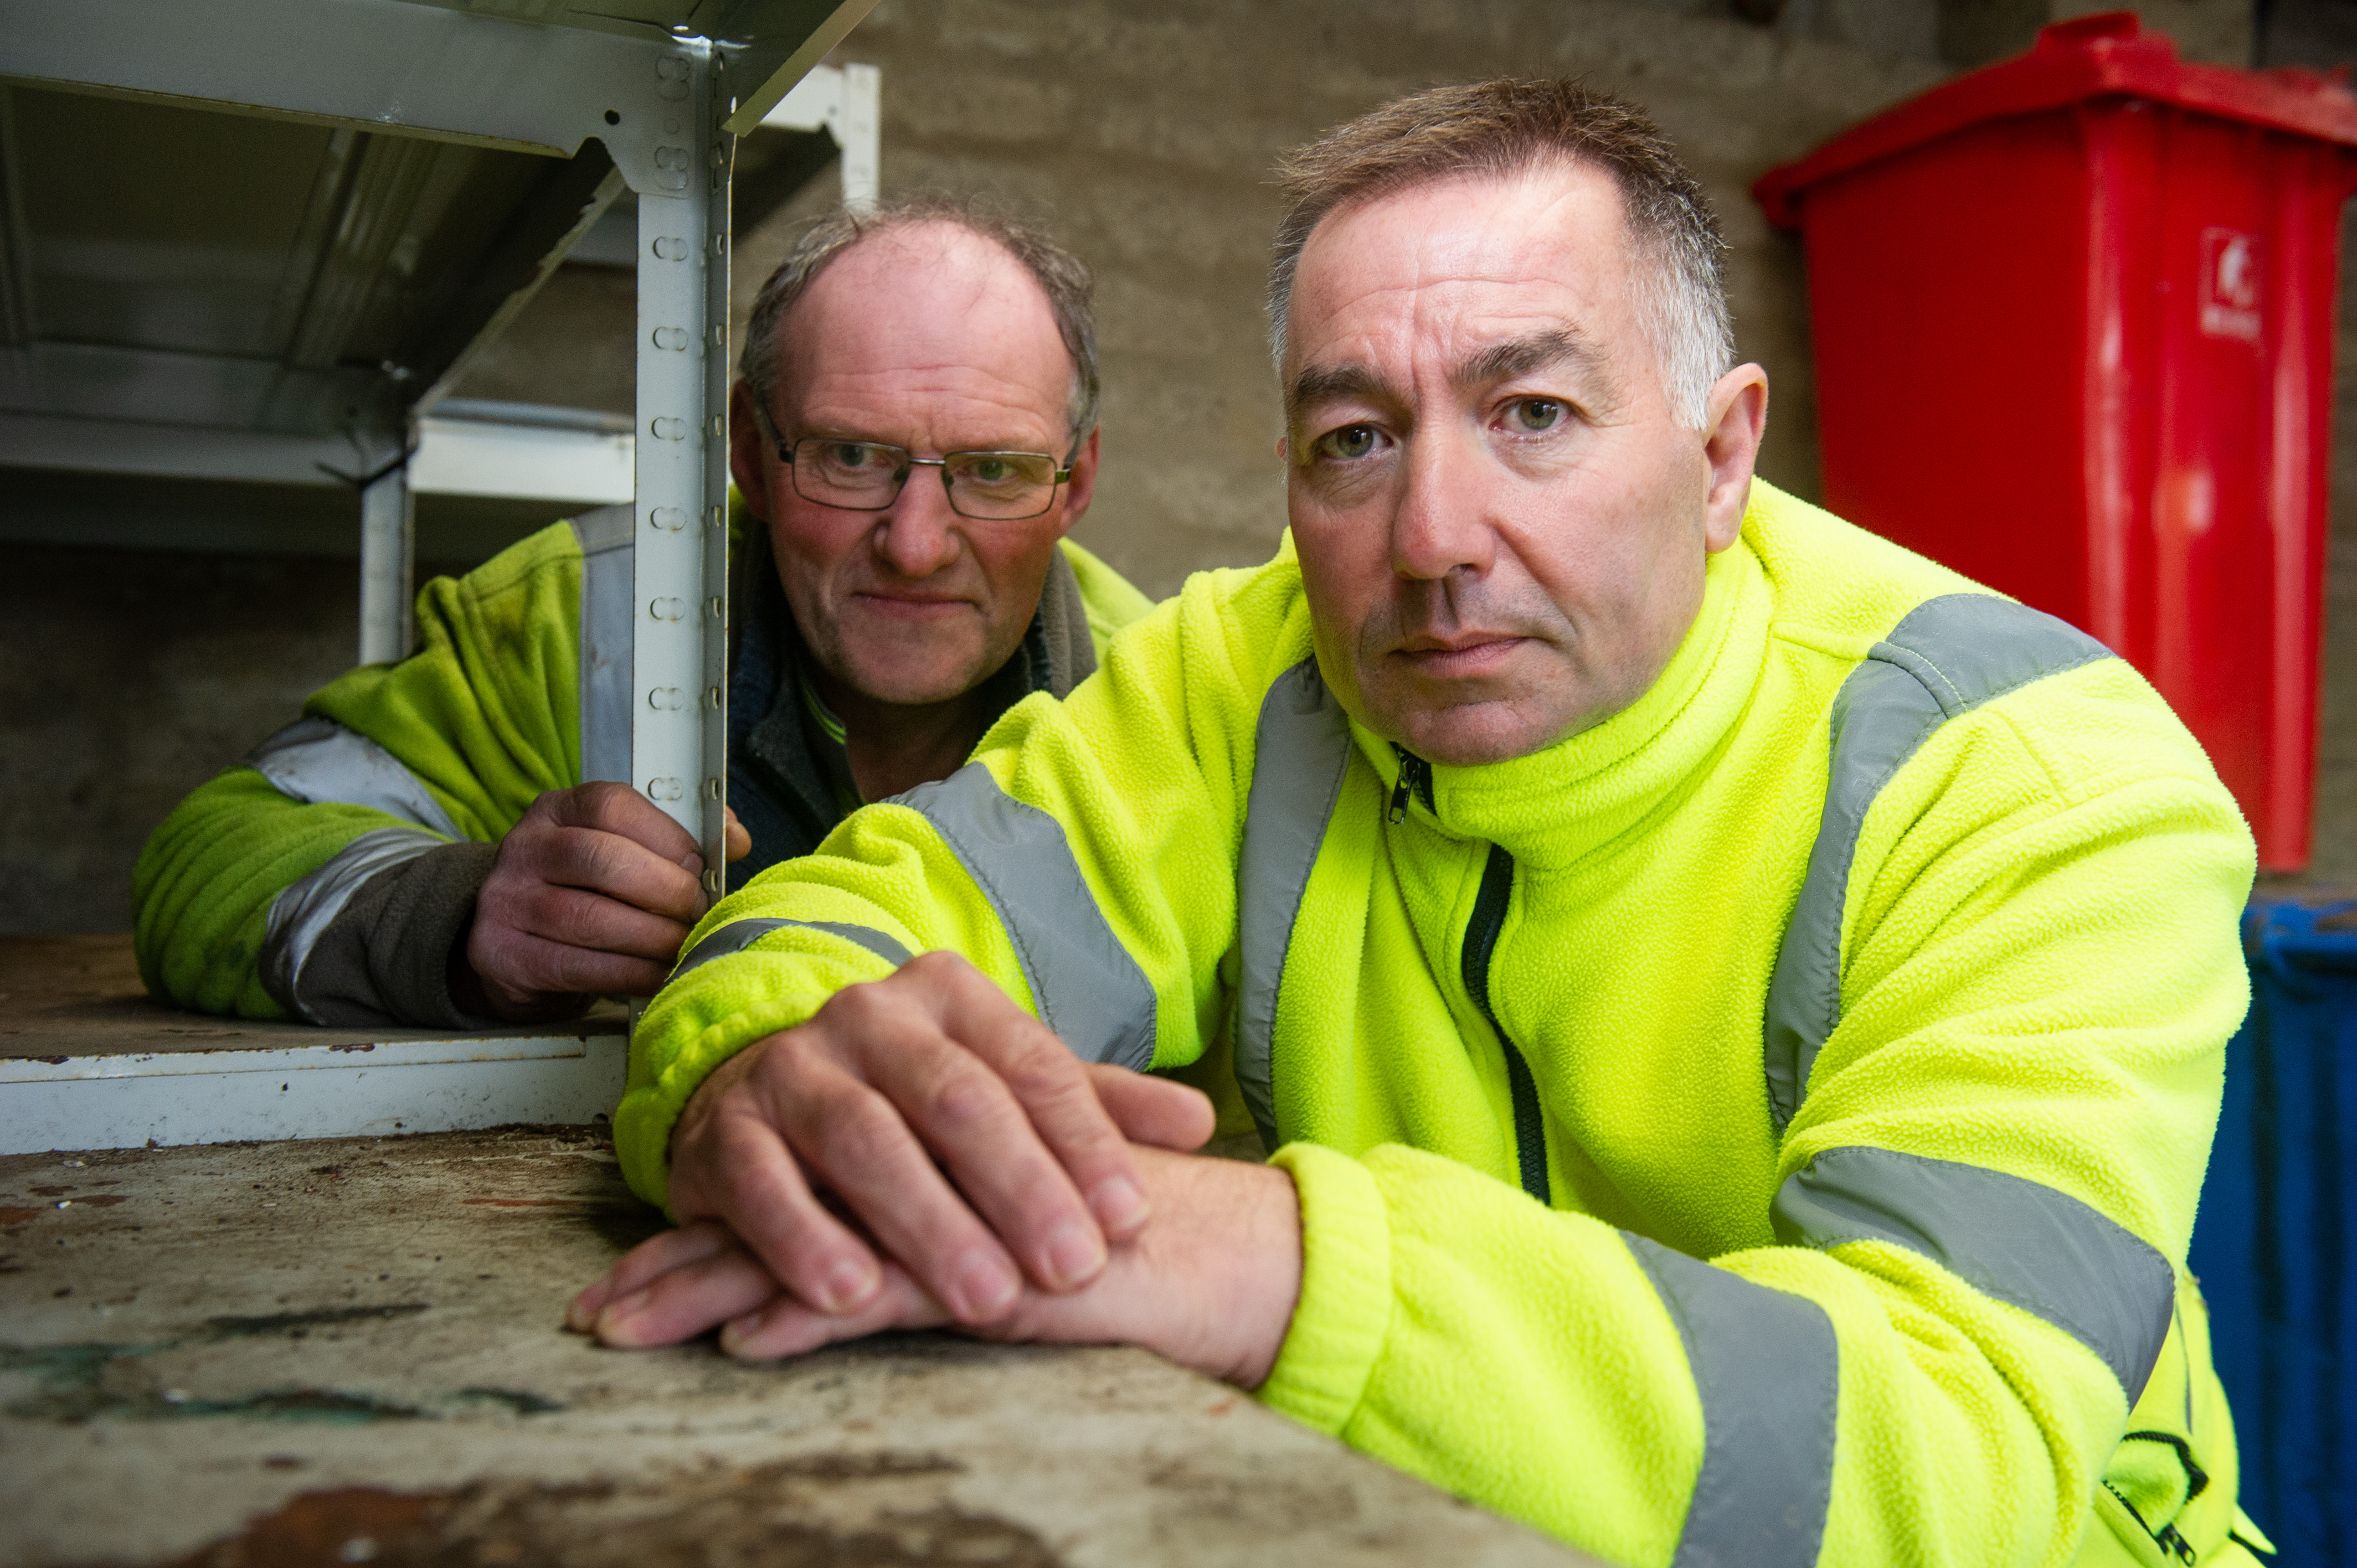 Keith Recycling Centre staff George Burgess and Jim Durkin alerted the police after discovering explosives.